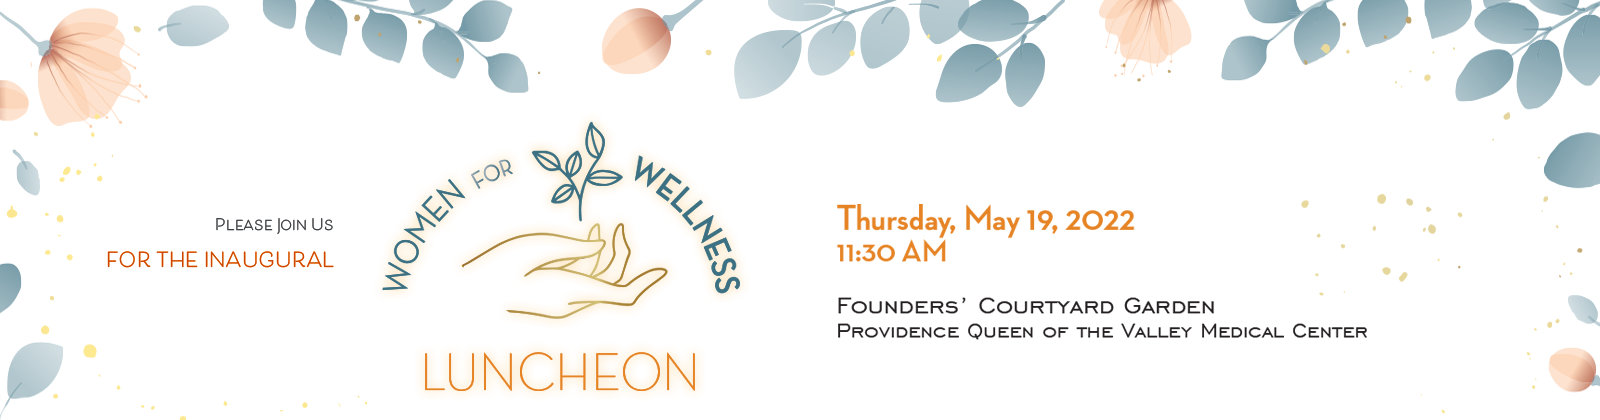 Women for Wellness Luncheon, May 19, 2022